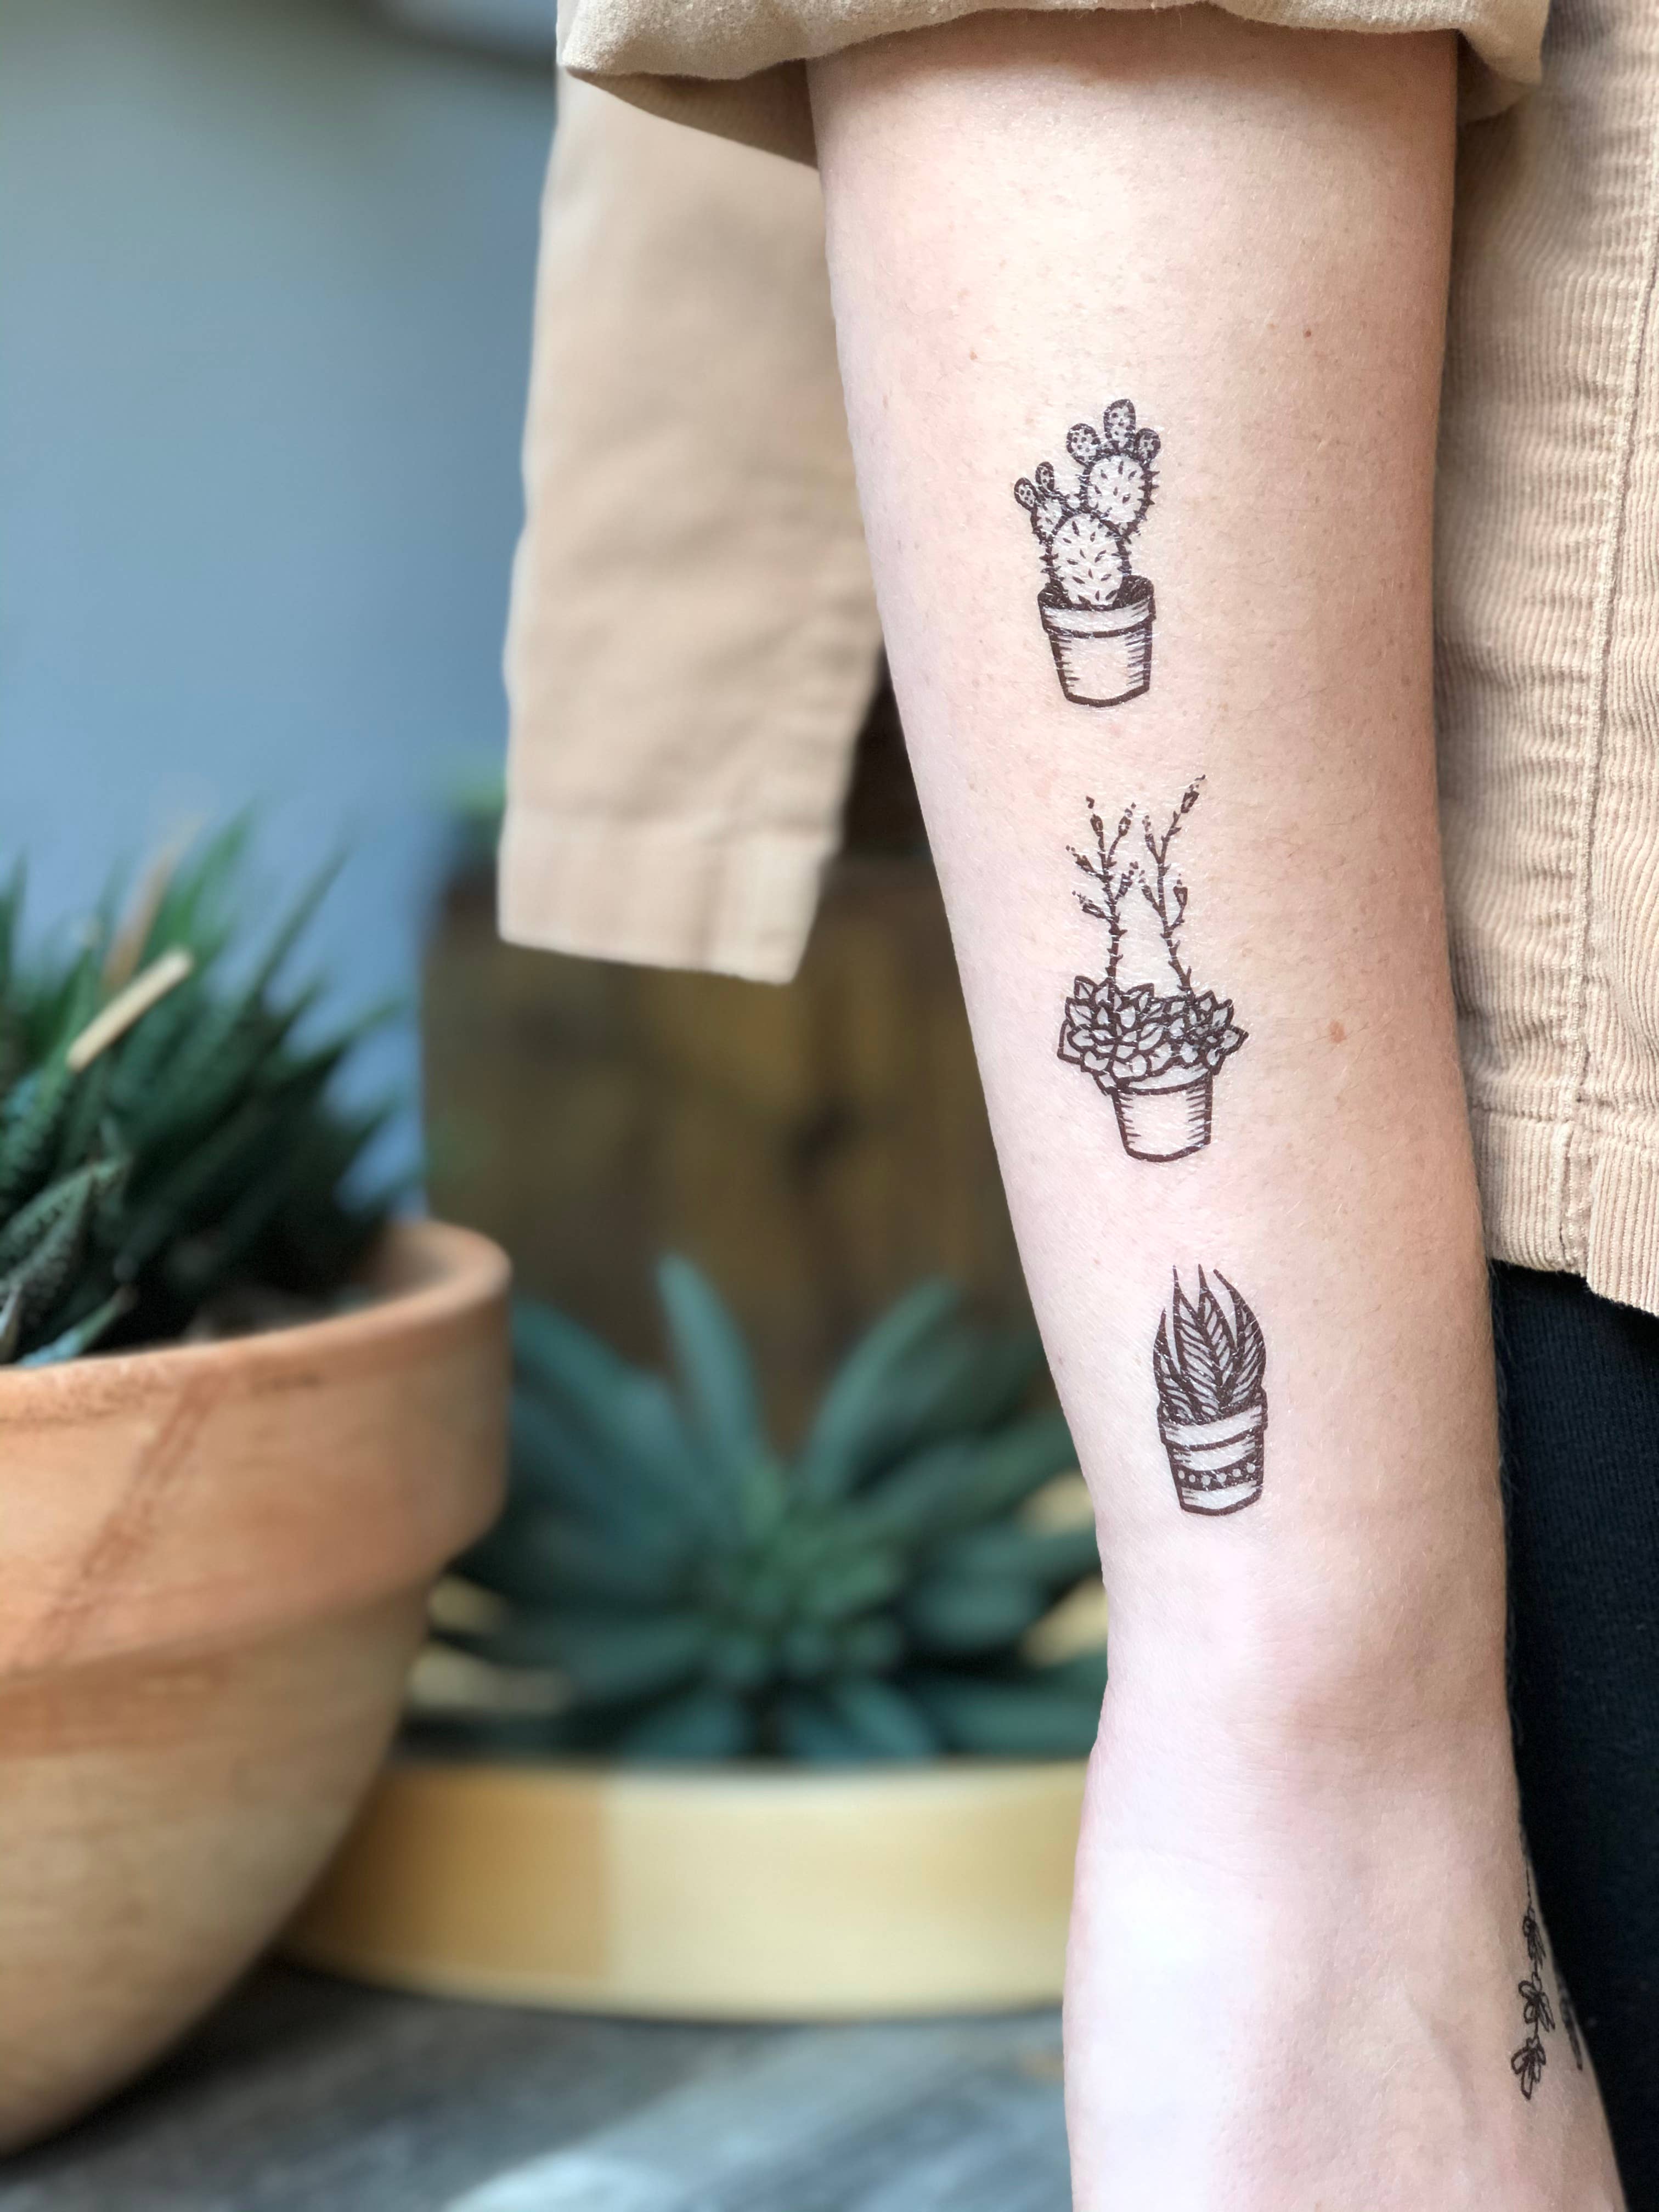 Destiny Tattoo - Cute little cactus done by Konstantinos @muramasa_kt. -  Thank you @_.isare_ for your trust! - @destinytattoo #tattoo #tattooed  #fresh #freshtattoo #cactus #cactustattoo #plants #tattooideas #tattooart  #minimaltattoo #smalltattoo ...